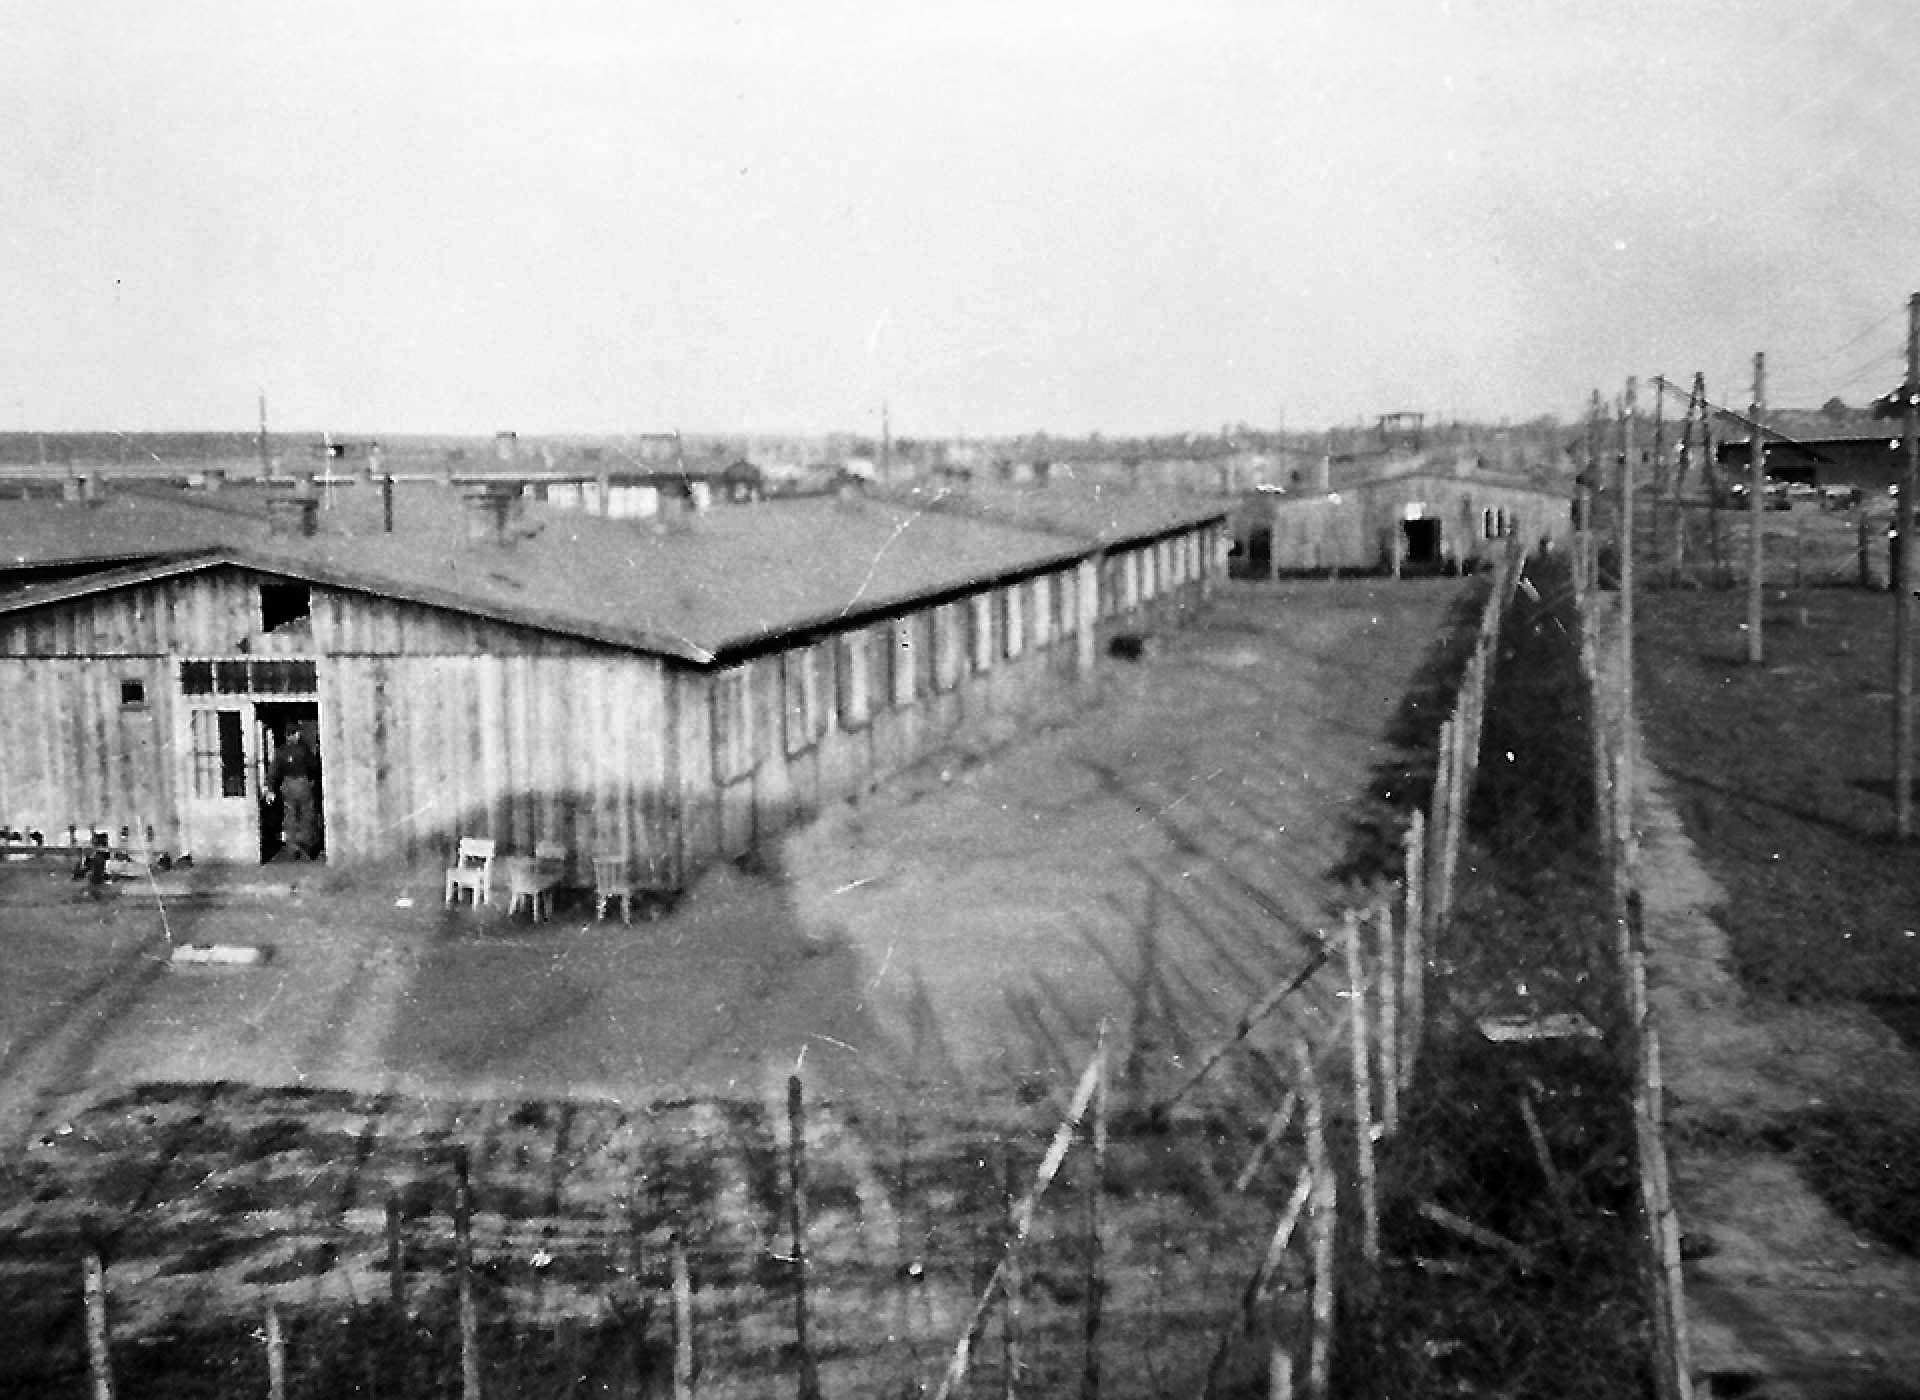 Barbed wire surrounds a barracks building at Stalag Luft I, the POW camp in northern Germany where Perry and some of his crew were imprisoned from March 1944 until the end of the war.